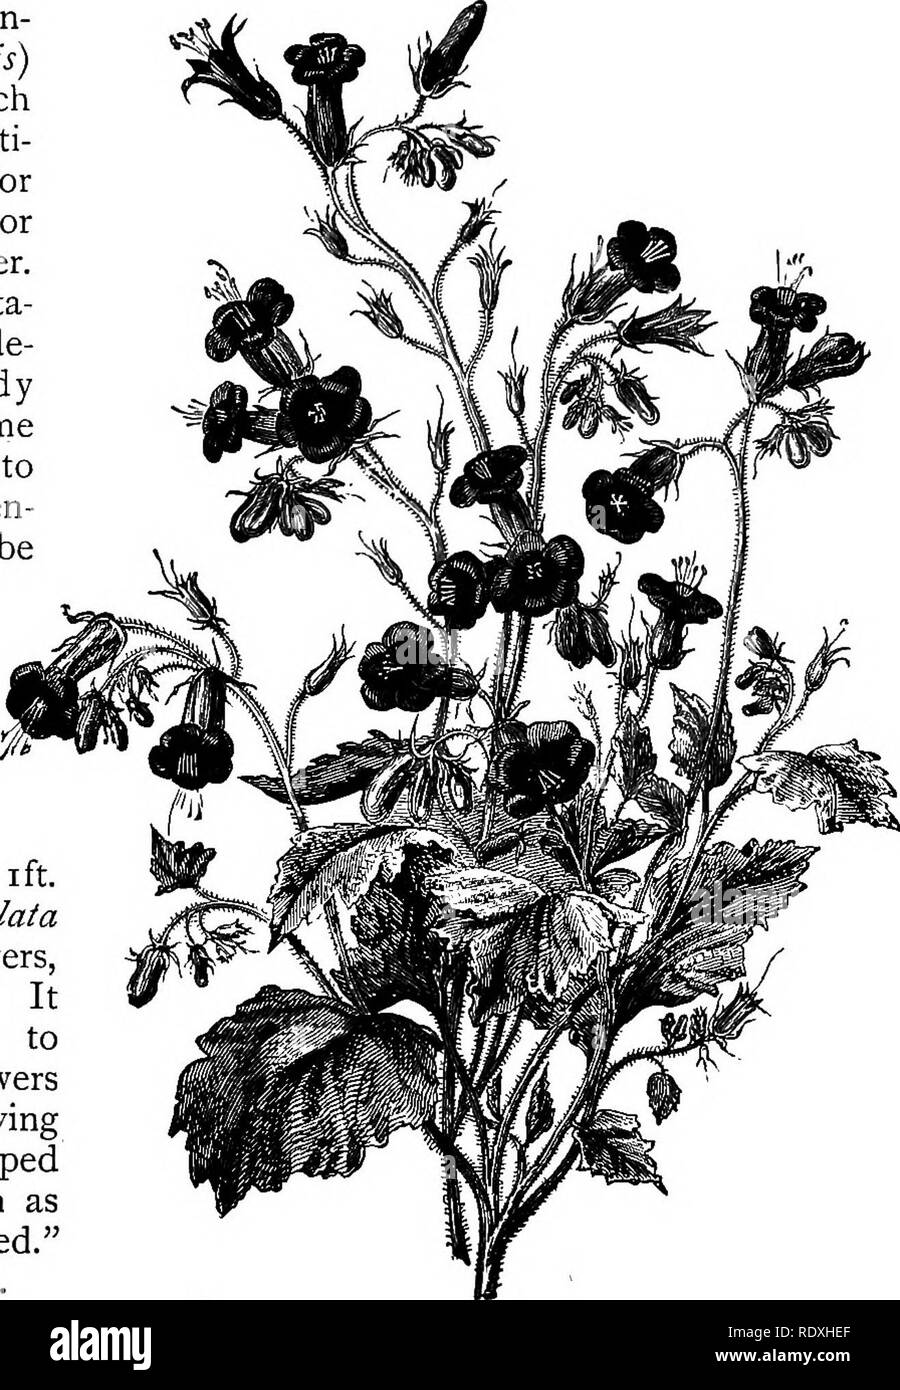 . The Book of gardening; a handbook of horticulture. Gardening; Horticulture. ON ANNUALS AND BIENNIALS. 239 useful for the same purpose, the plants being literally covered with flowers in the spring. Virginian Stocks.—Malcolmia maritima is a well-known free- flowering annual, easy of culture in any ordinary garden soil. If sown in April, it will flower in June, and by successional sowings it may be had in flower from then until September. It grows from 6in. to 12m. high, and has lilac, rose, red, and white flowers. Viscaria (now in- cluded under Lychnis) is a genus which yields several beauti- Stock Photo